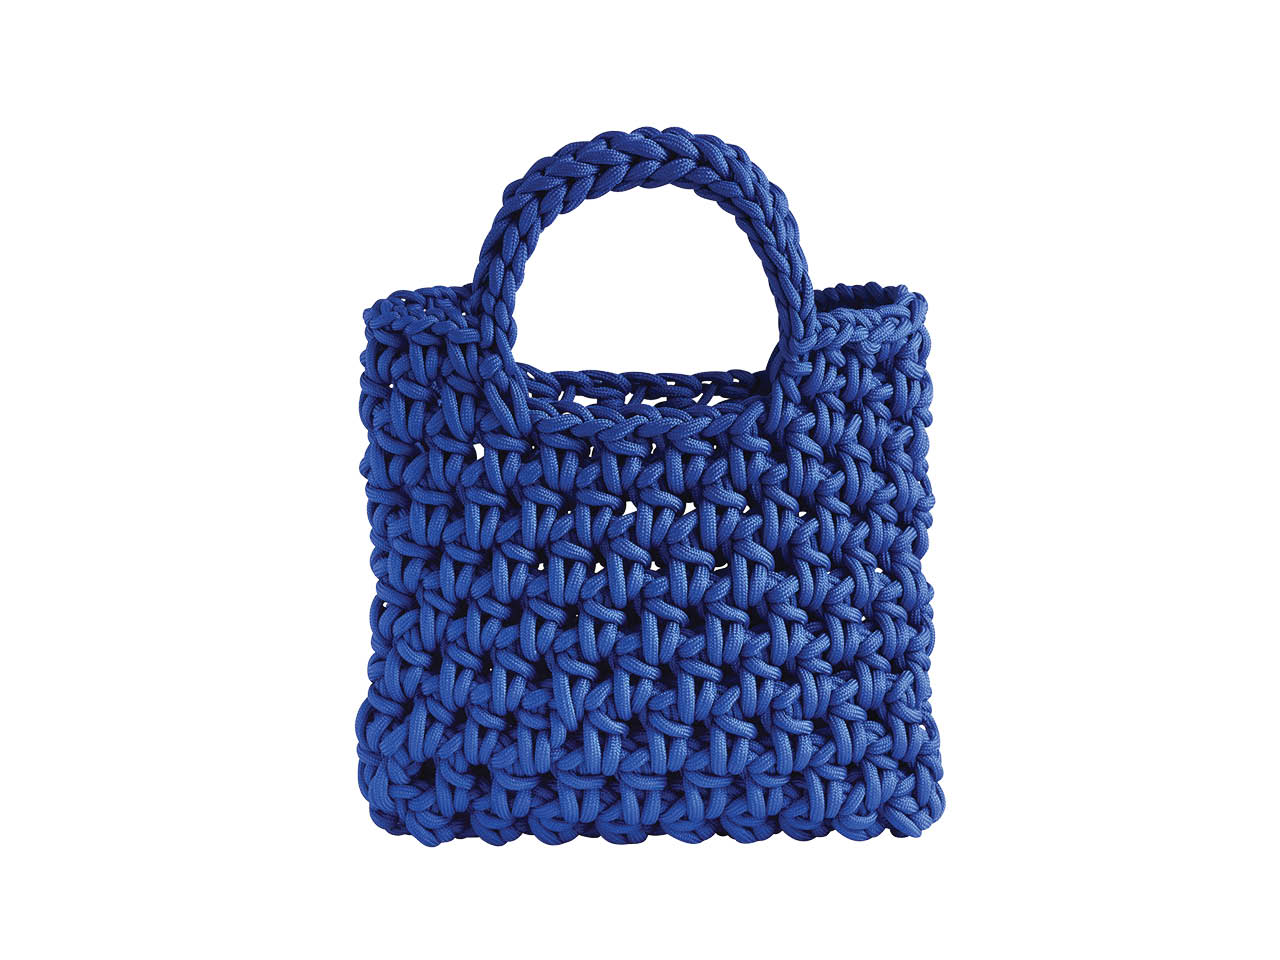 A blue knit bag from iSoul Toronto for a summer outfit.